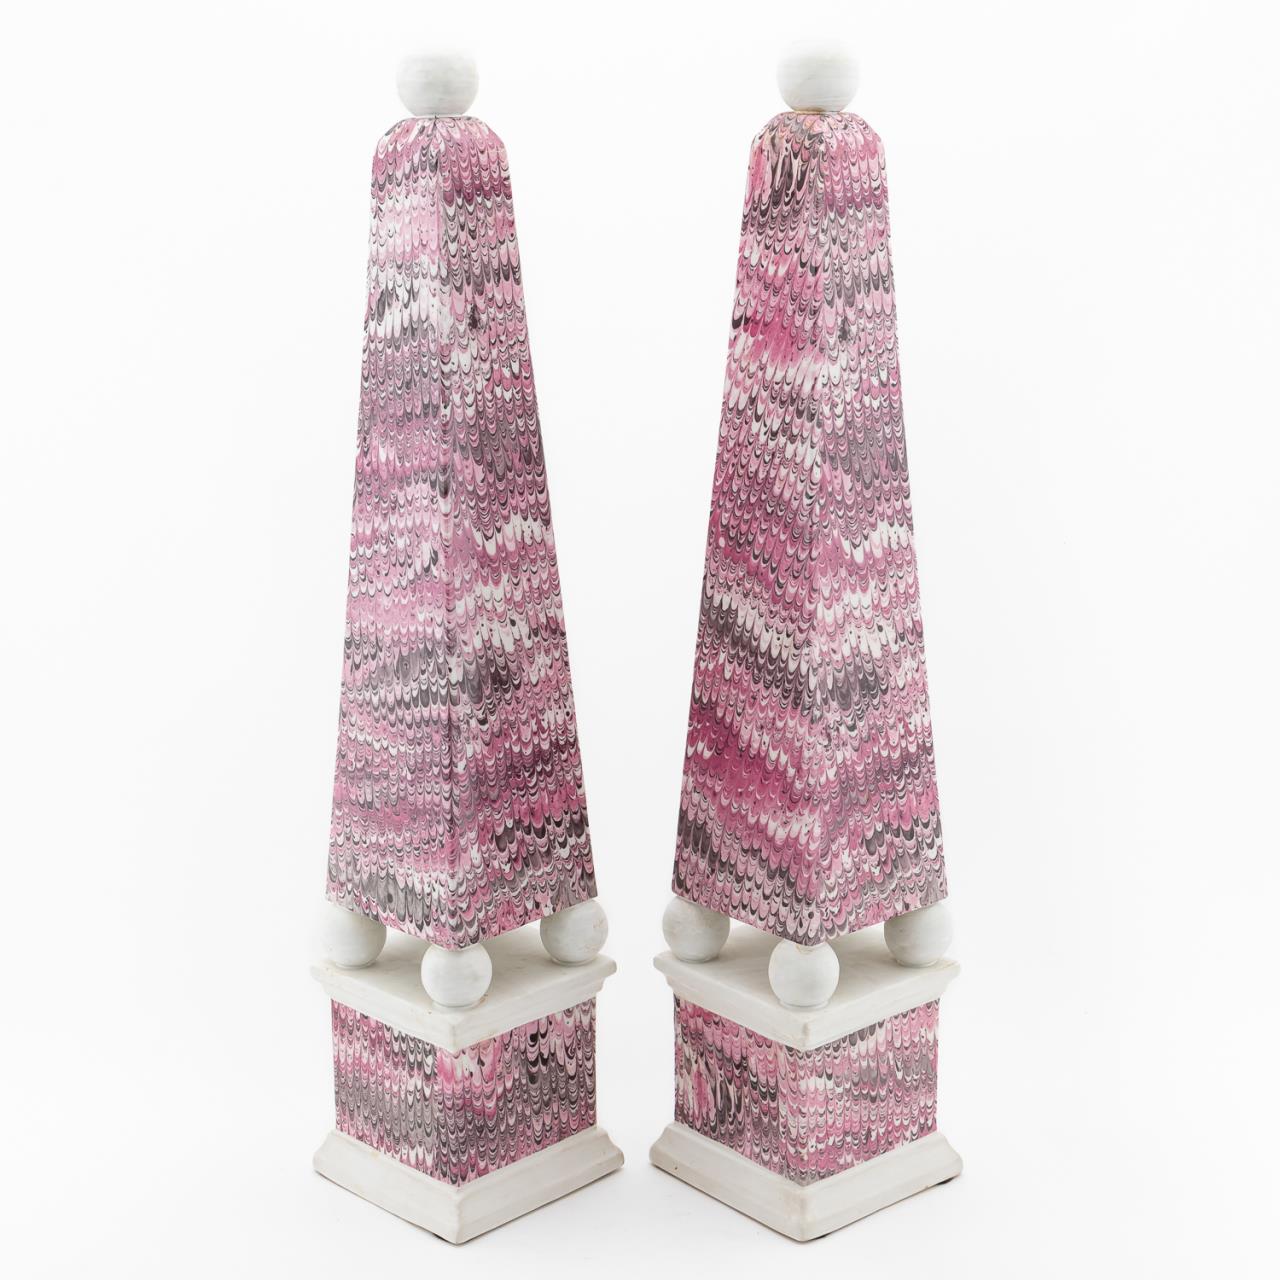 PAIR, PINK MARBLE PATTERNED NEOCLASSICAL